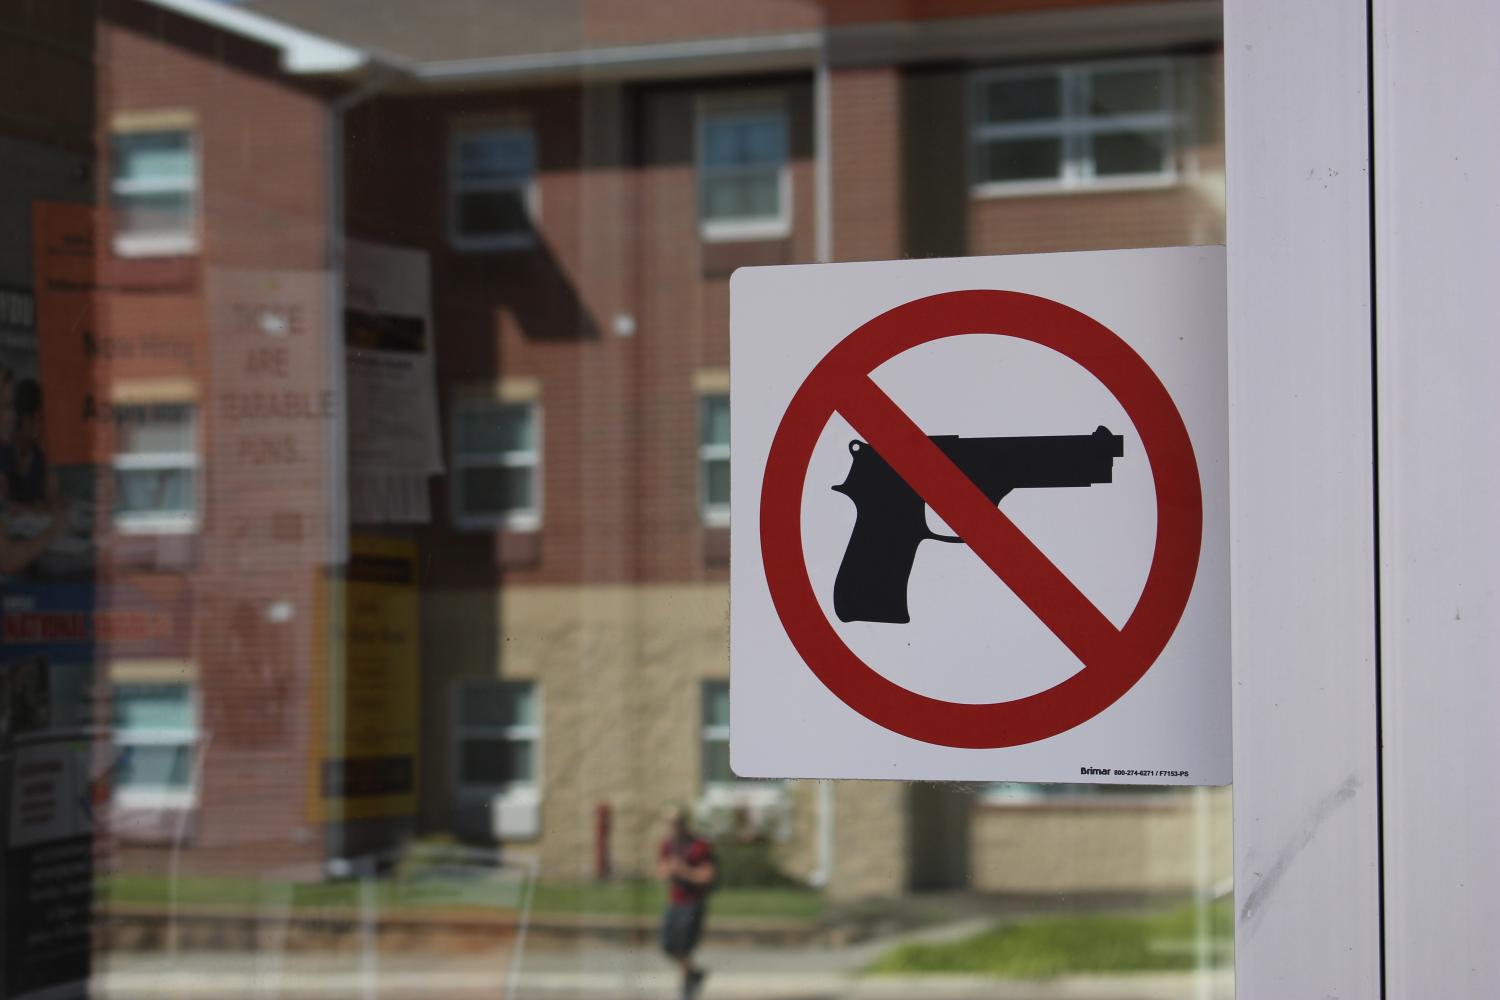 An example of the no gun signs which are posed on several campus buildings.